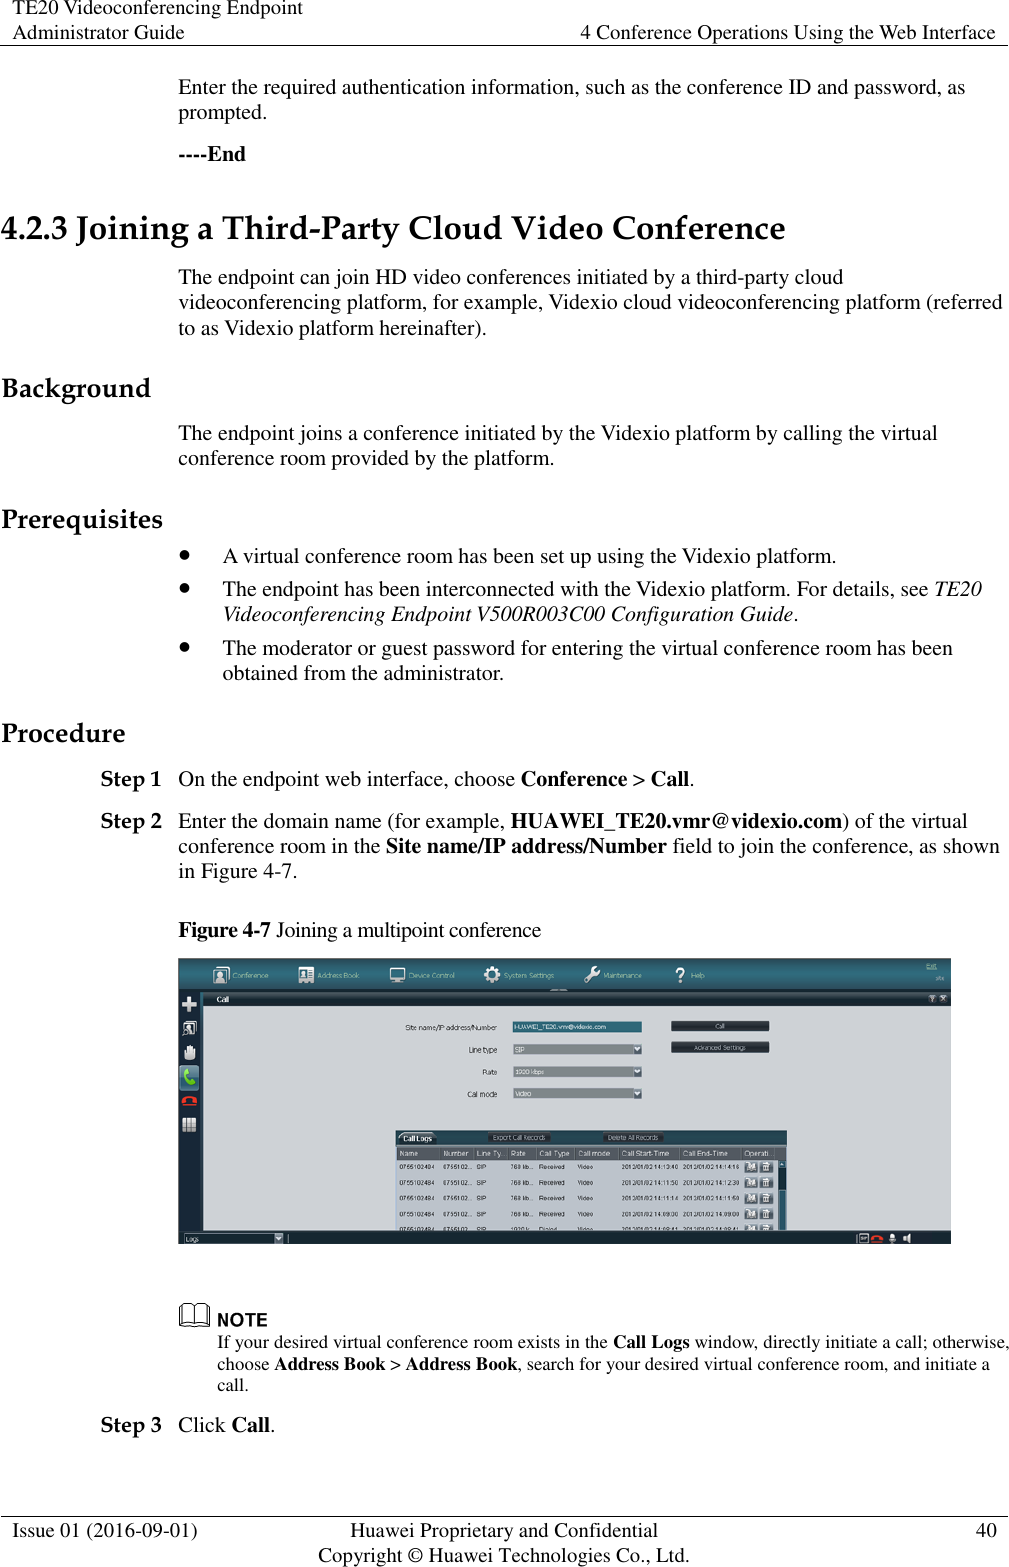 TE20 Videoconferencing Endpoint Administrator Guide 4 Conference Operations Using the Web Interface  Issue 01 (2016-09-01) Huawei Proprietary and Confidential                                     Copyright © Huawei Technologies Co., Ltd. 40  Enter the required authentication information, such as the conference ID and password, as prompted. ----End 4.2.3 Joining a Third-Party Cloud Video Conference The endpoint can join HD video conferences initiated by a third-party cloud videoconferencing platform, for example, Videxio cloud videoconferencing platform (referred to as Videxio platform hereinafter). Background The endpoint joins a conference initiated by the Videxio platform by calling the virtual conference room provided by the platform. Prerequisites  A virtual conference room has been set up using the Videxio platform.  The endpoint has been interconnected with the Videxio platform. For details, see TE20 Videoconferencing Endpoint V500R003C00 Configuration Guide.  The moderator or guest password for entering the virtual conference room has been obtained from the administrator. Procedure Step 1 On the endpoint web interface, choose Conference &gt; Call. Step 2 Enter the domain name (for example, HUAWEI_TE20.vmr@videxio.com) of the virtual conference room in the Site name/IP address/Number field to join the conference, as shown in Figure 4-7. Figure 4-7 Joining a multipoint conference    If your desired virtual conference room exists in the Call Logs window, directly initiate a call; otherwise, choose Address Book &gt; Address Book, search for your desired virtual conference room, and initiate a call. Step 3 Click Call. 